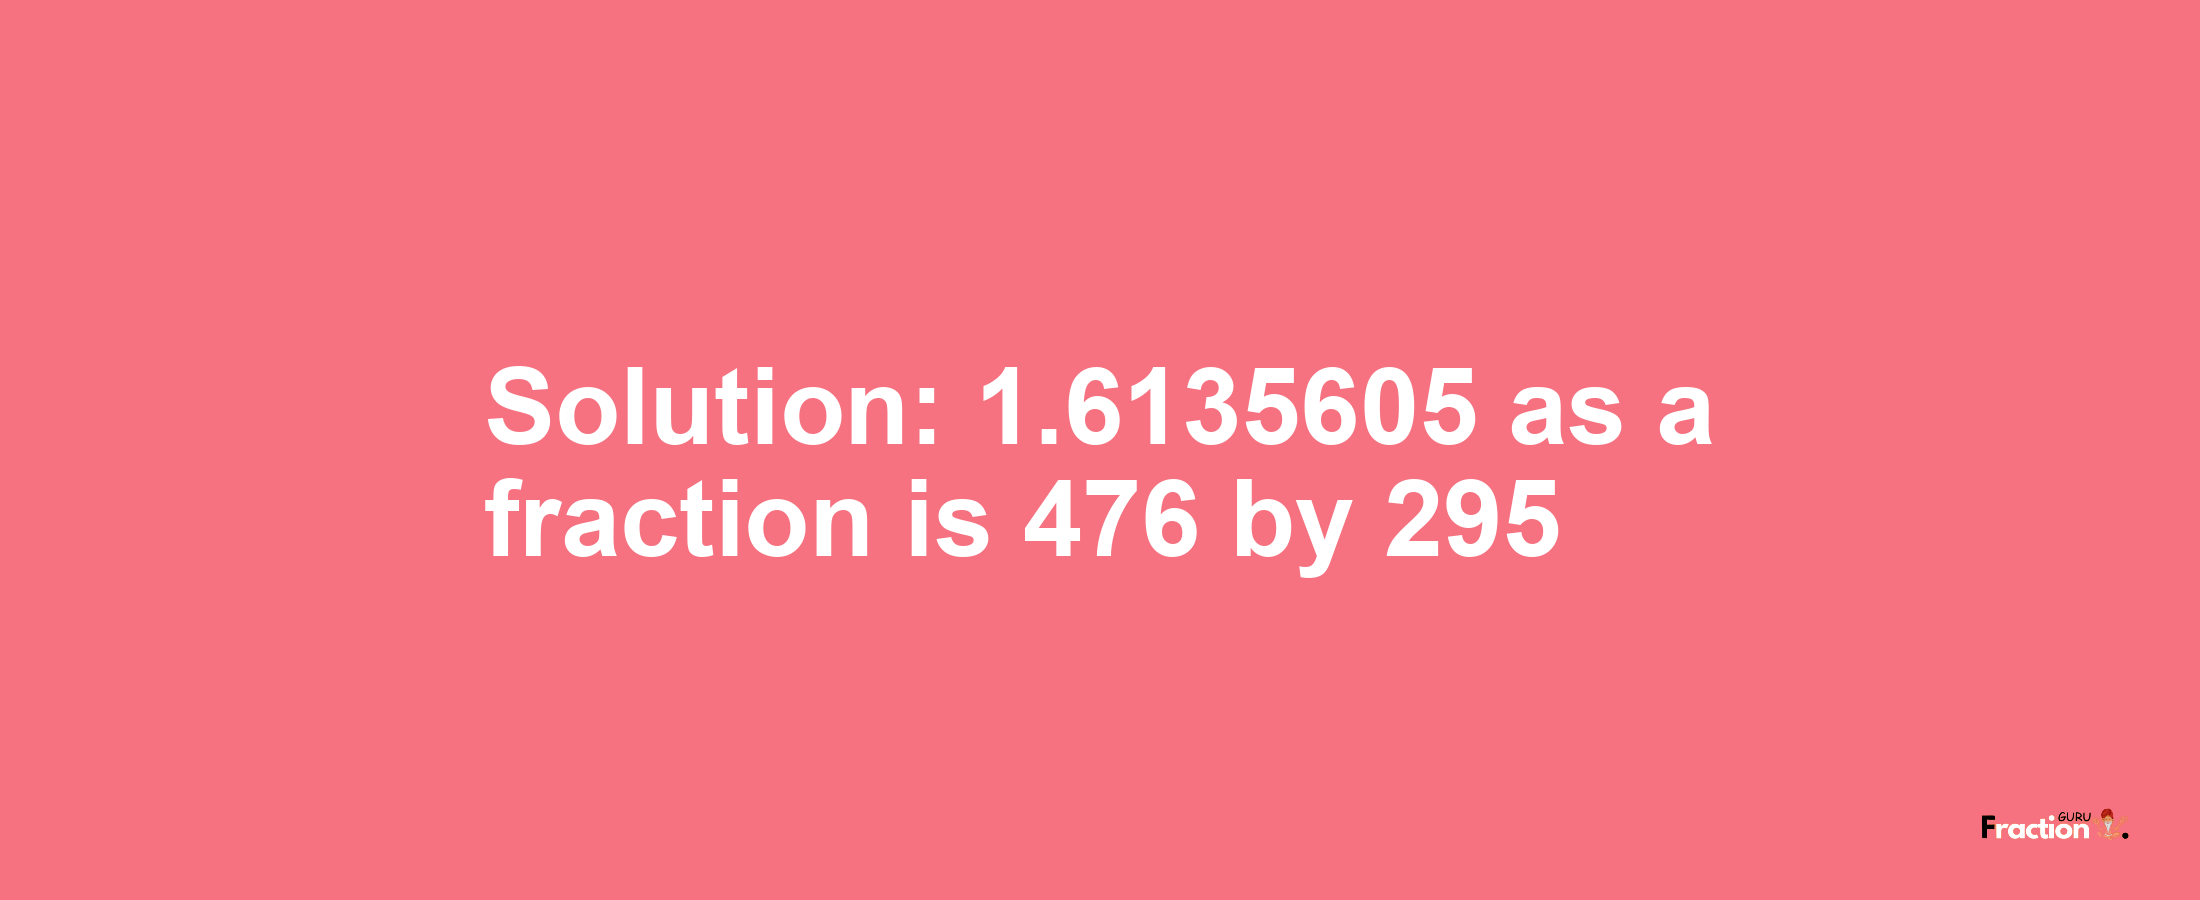 Solution:1.6135605 as a fraction is 476/295